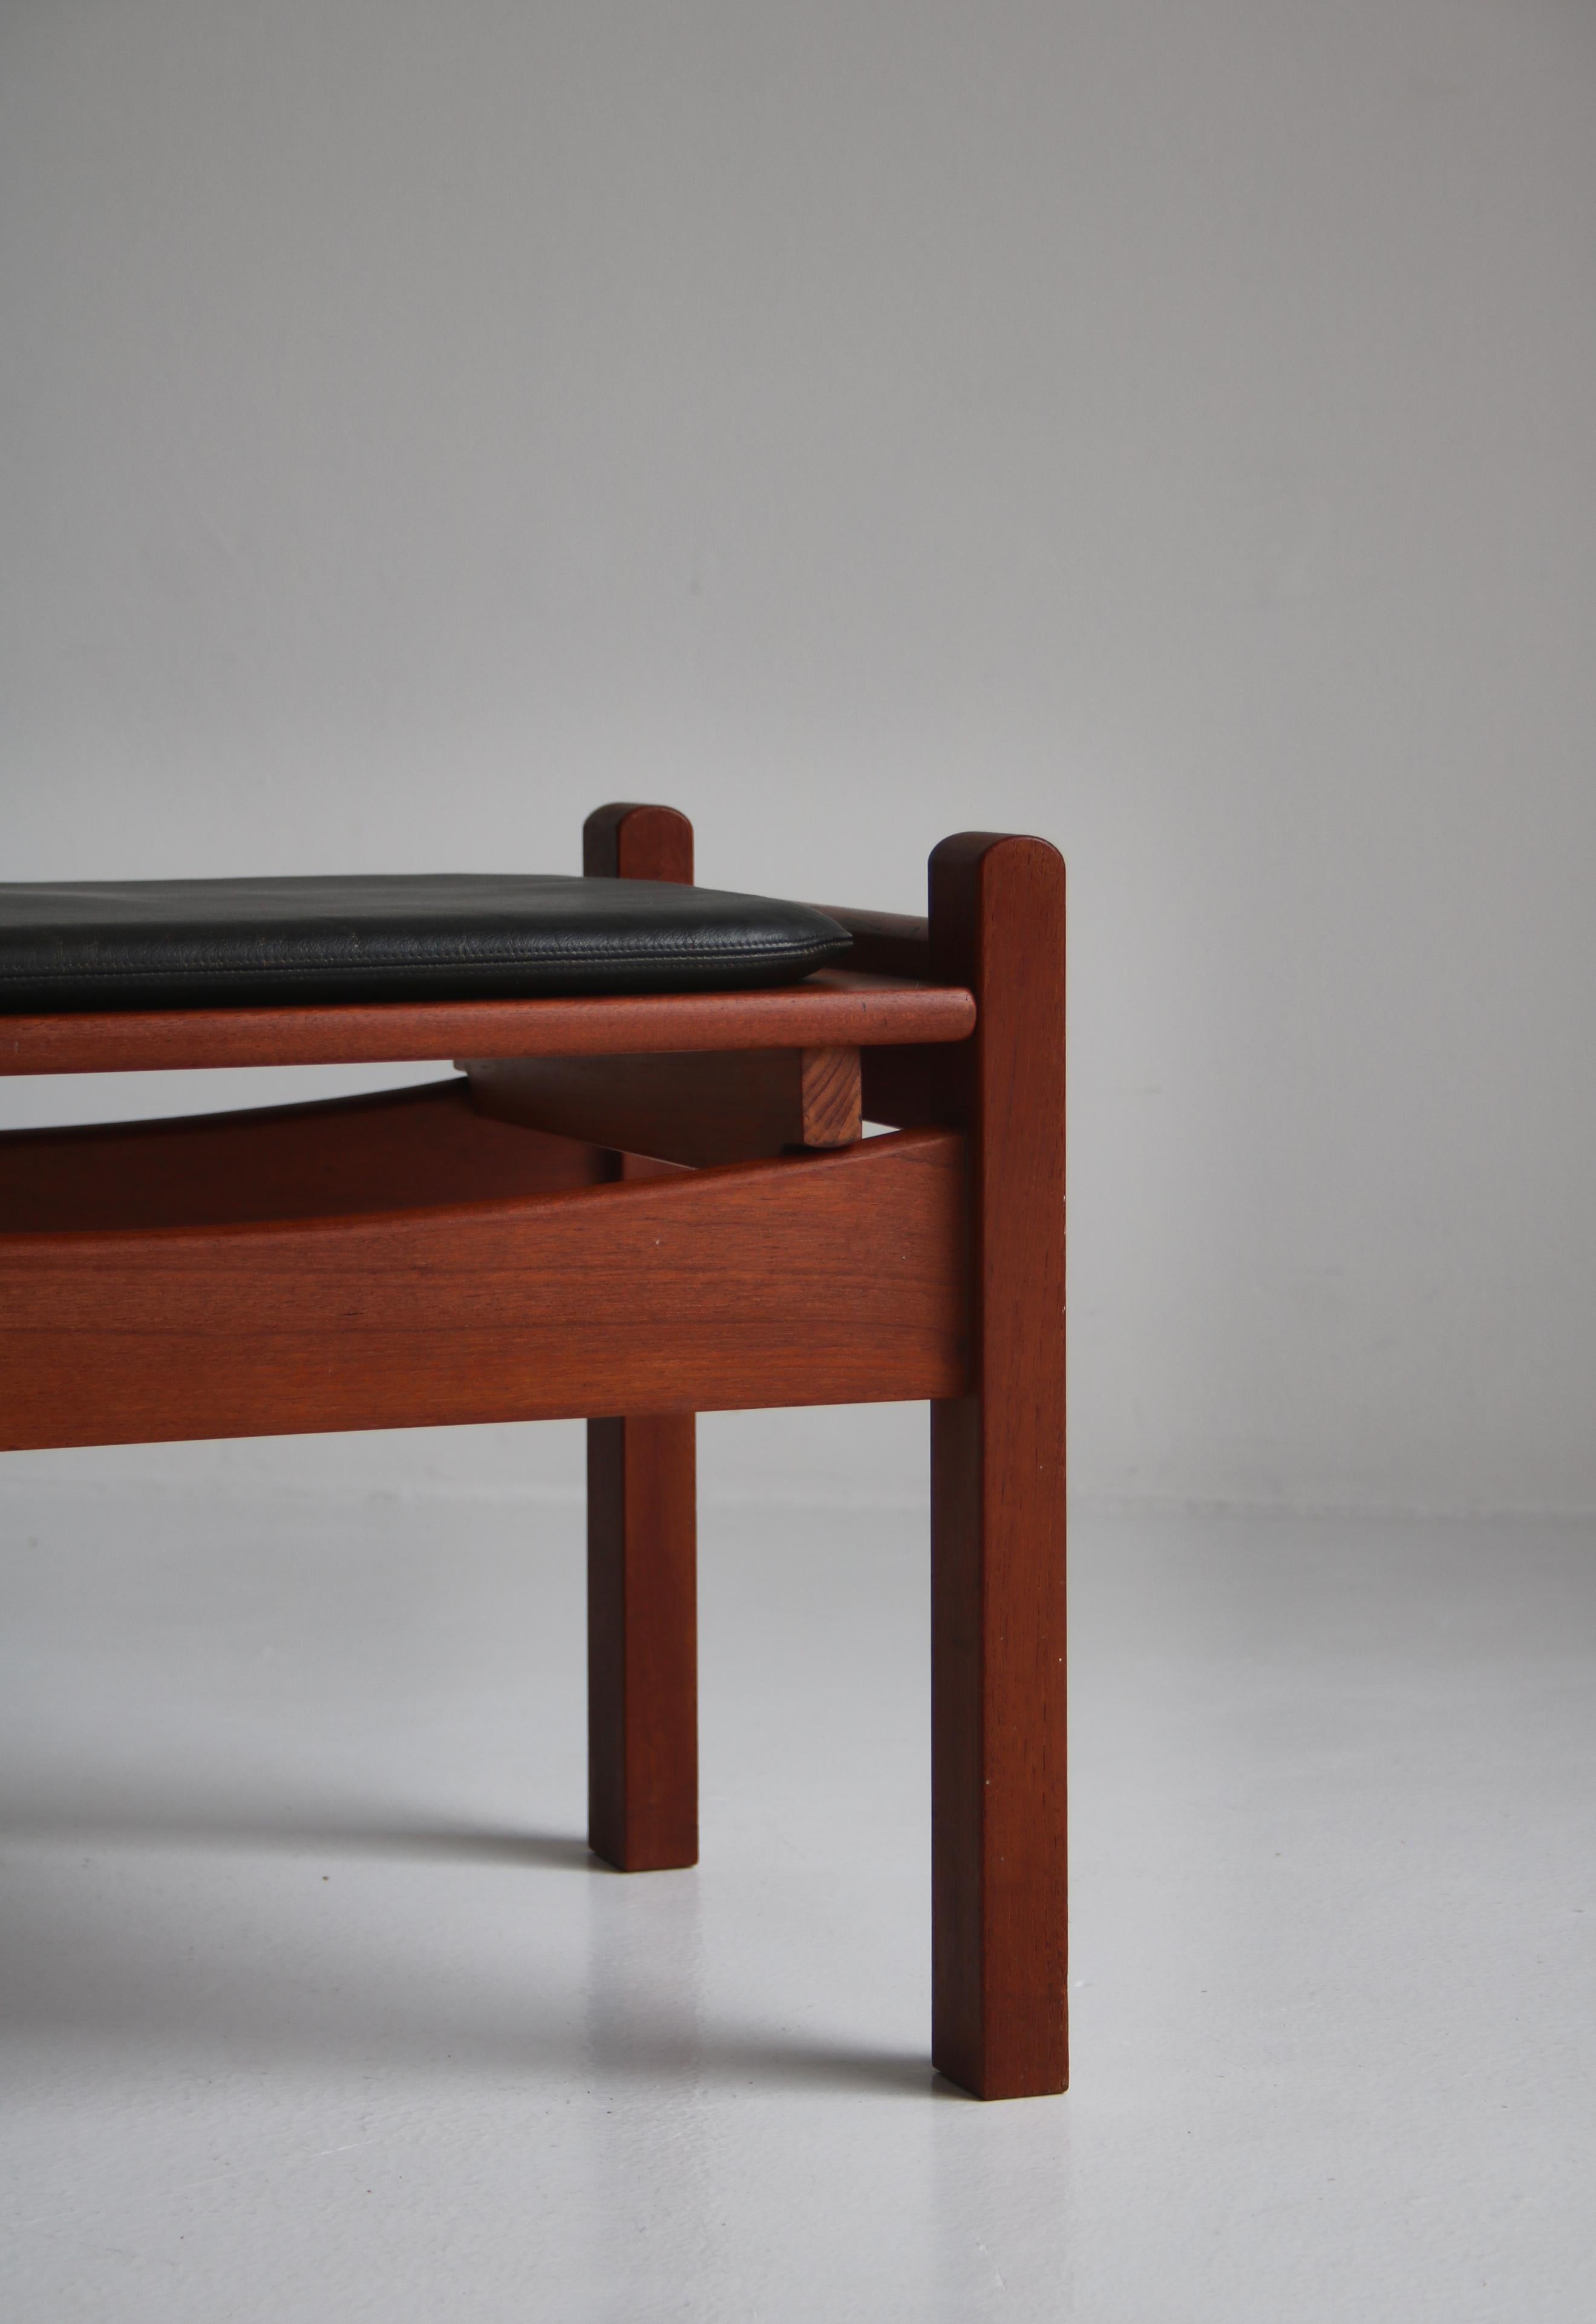 Danish Modern Stool / Sidetable in Teakwood and Black Leather, 1960s For Sale 2